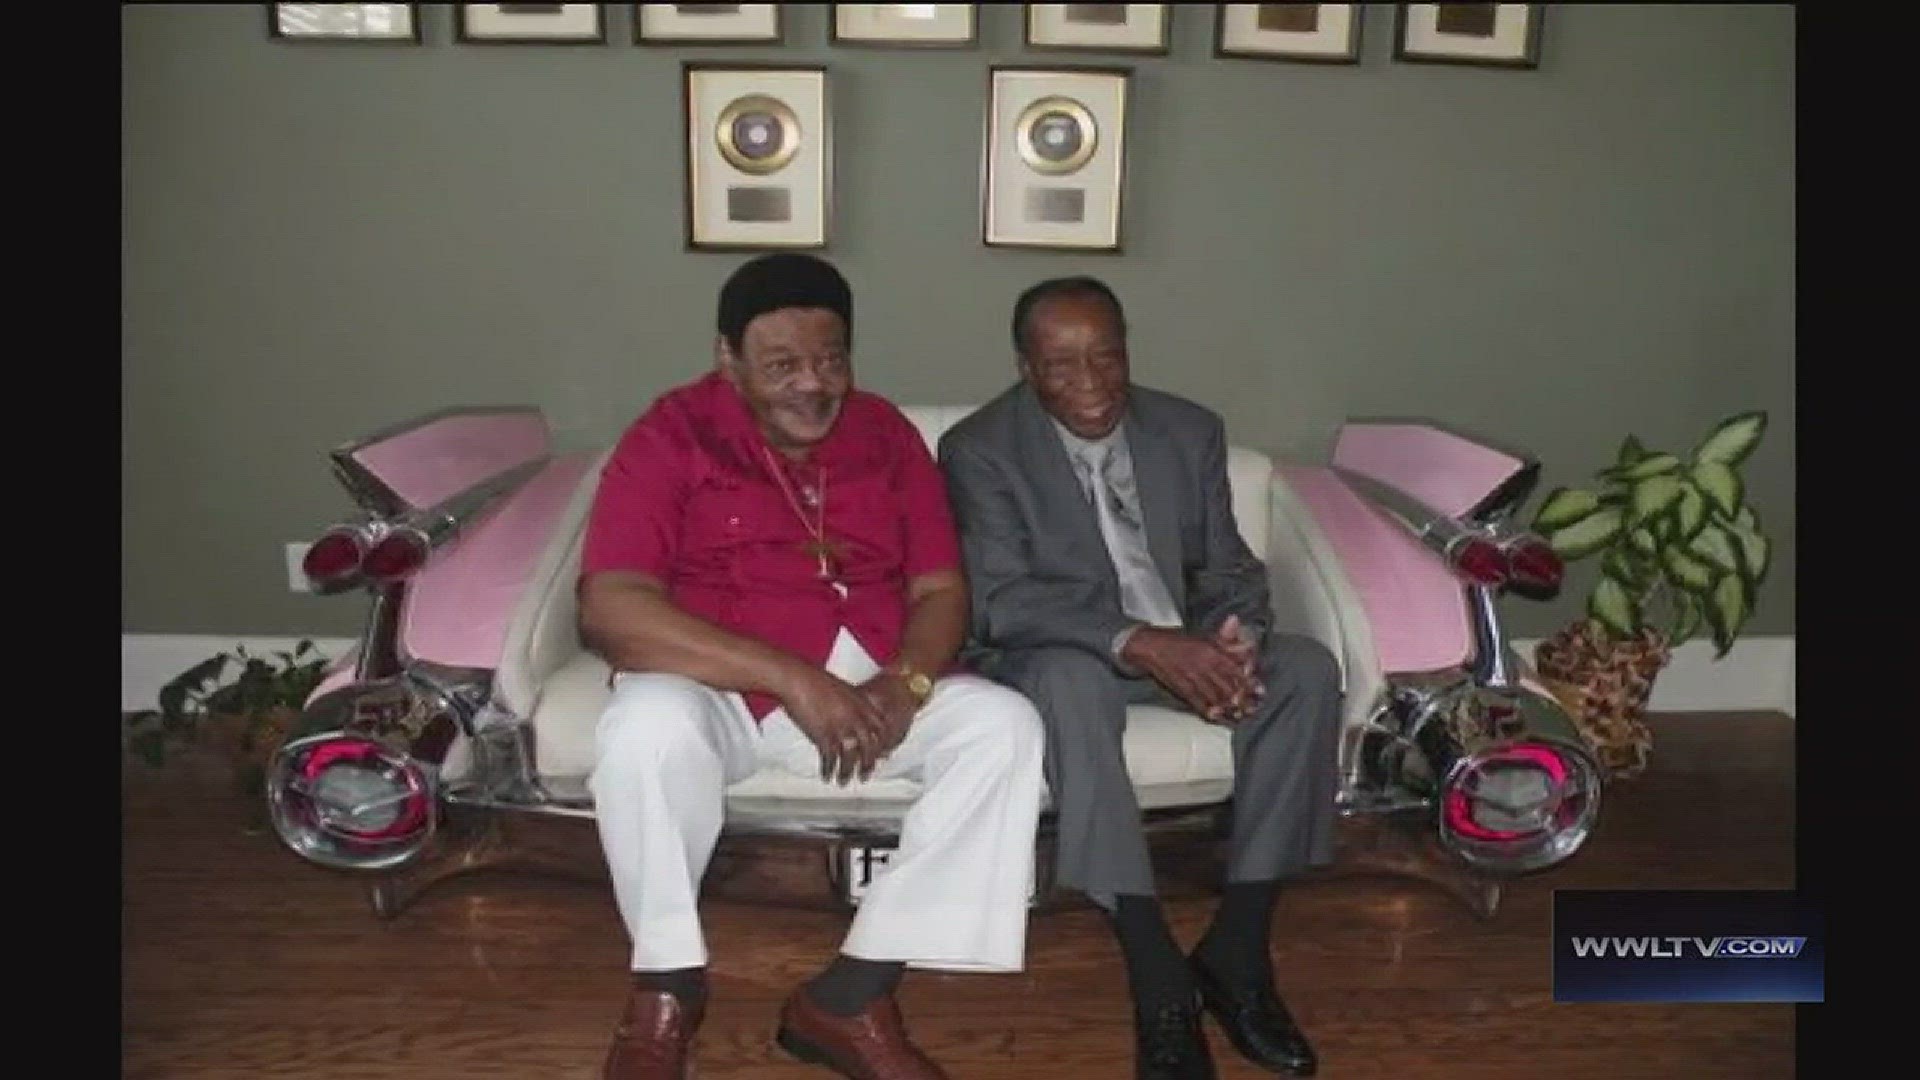 Two of Fats Domino's grandchildren talked to Eric Paulsen about their grandfather and his legacy.